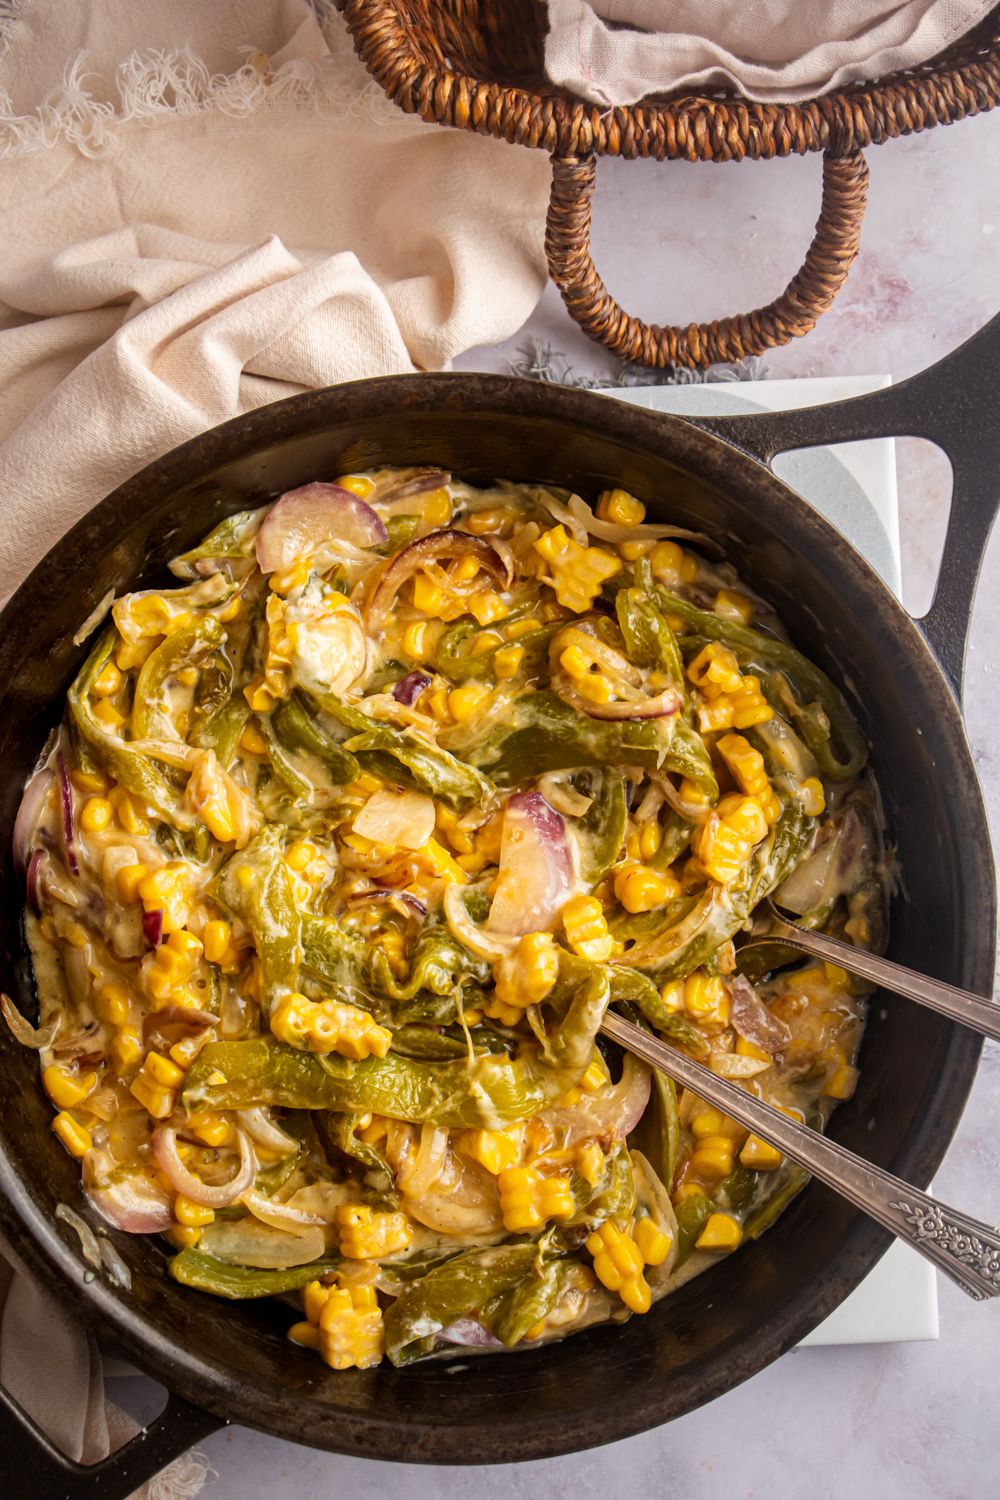 Skillet with rajas con queso including sautéed poblano peppers, corn, red onion, and creamy cheese sauce.